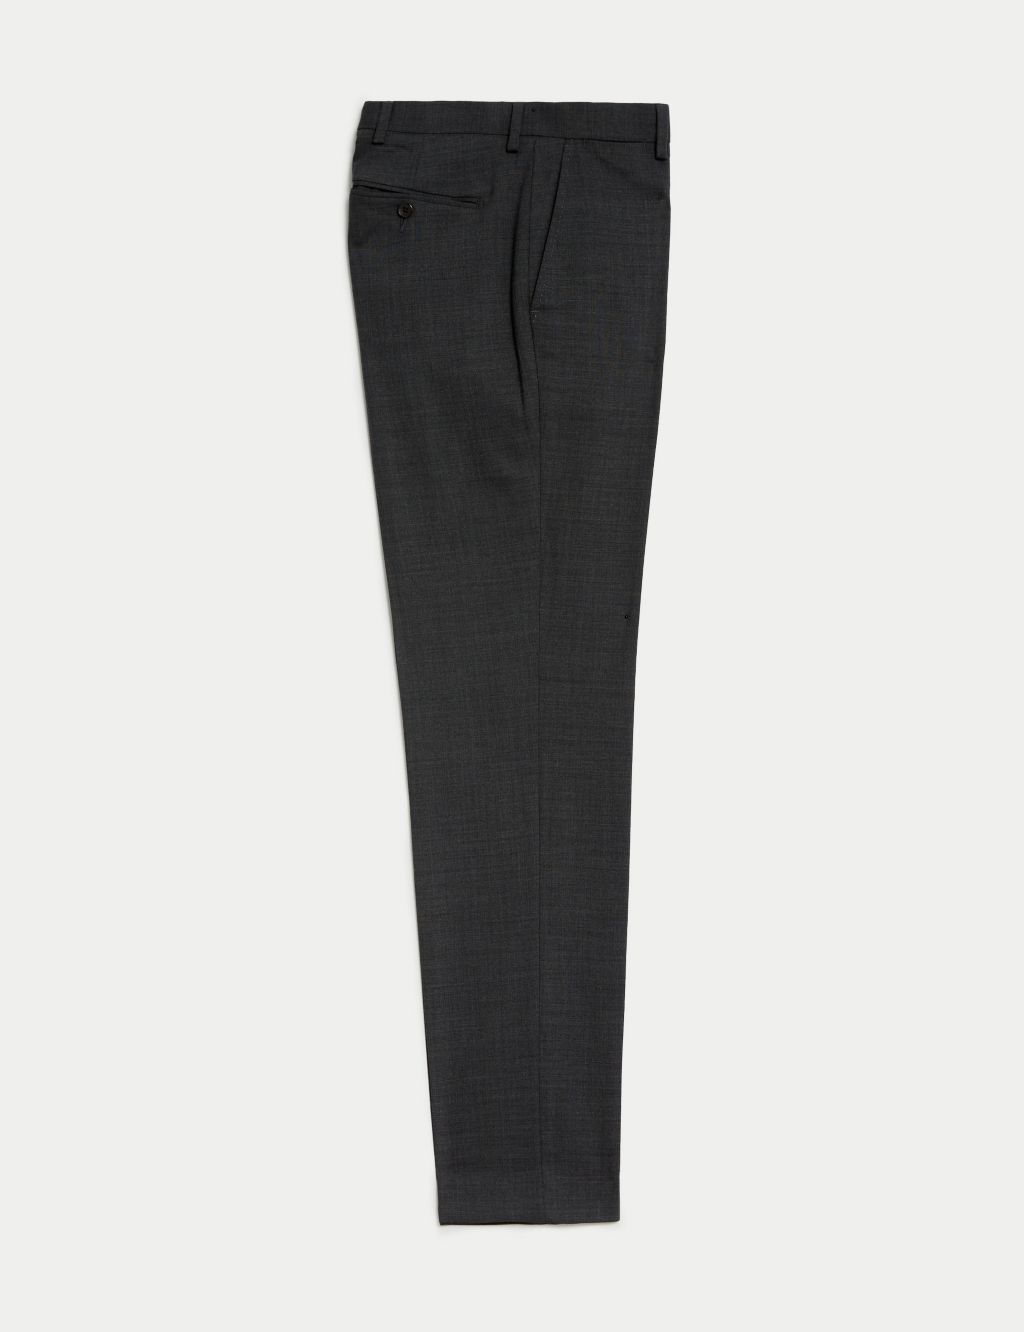 Wool Blend Flat Front Stretch Trousers image 2